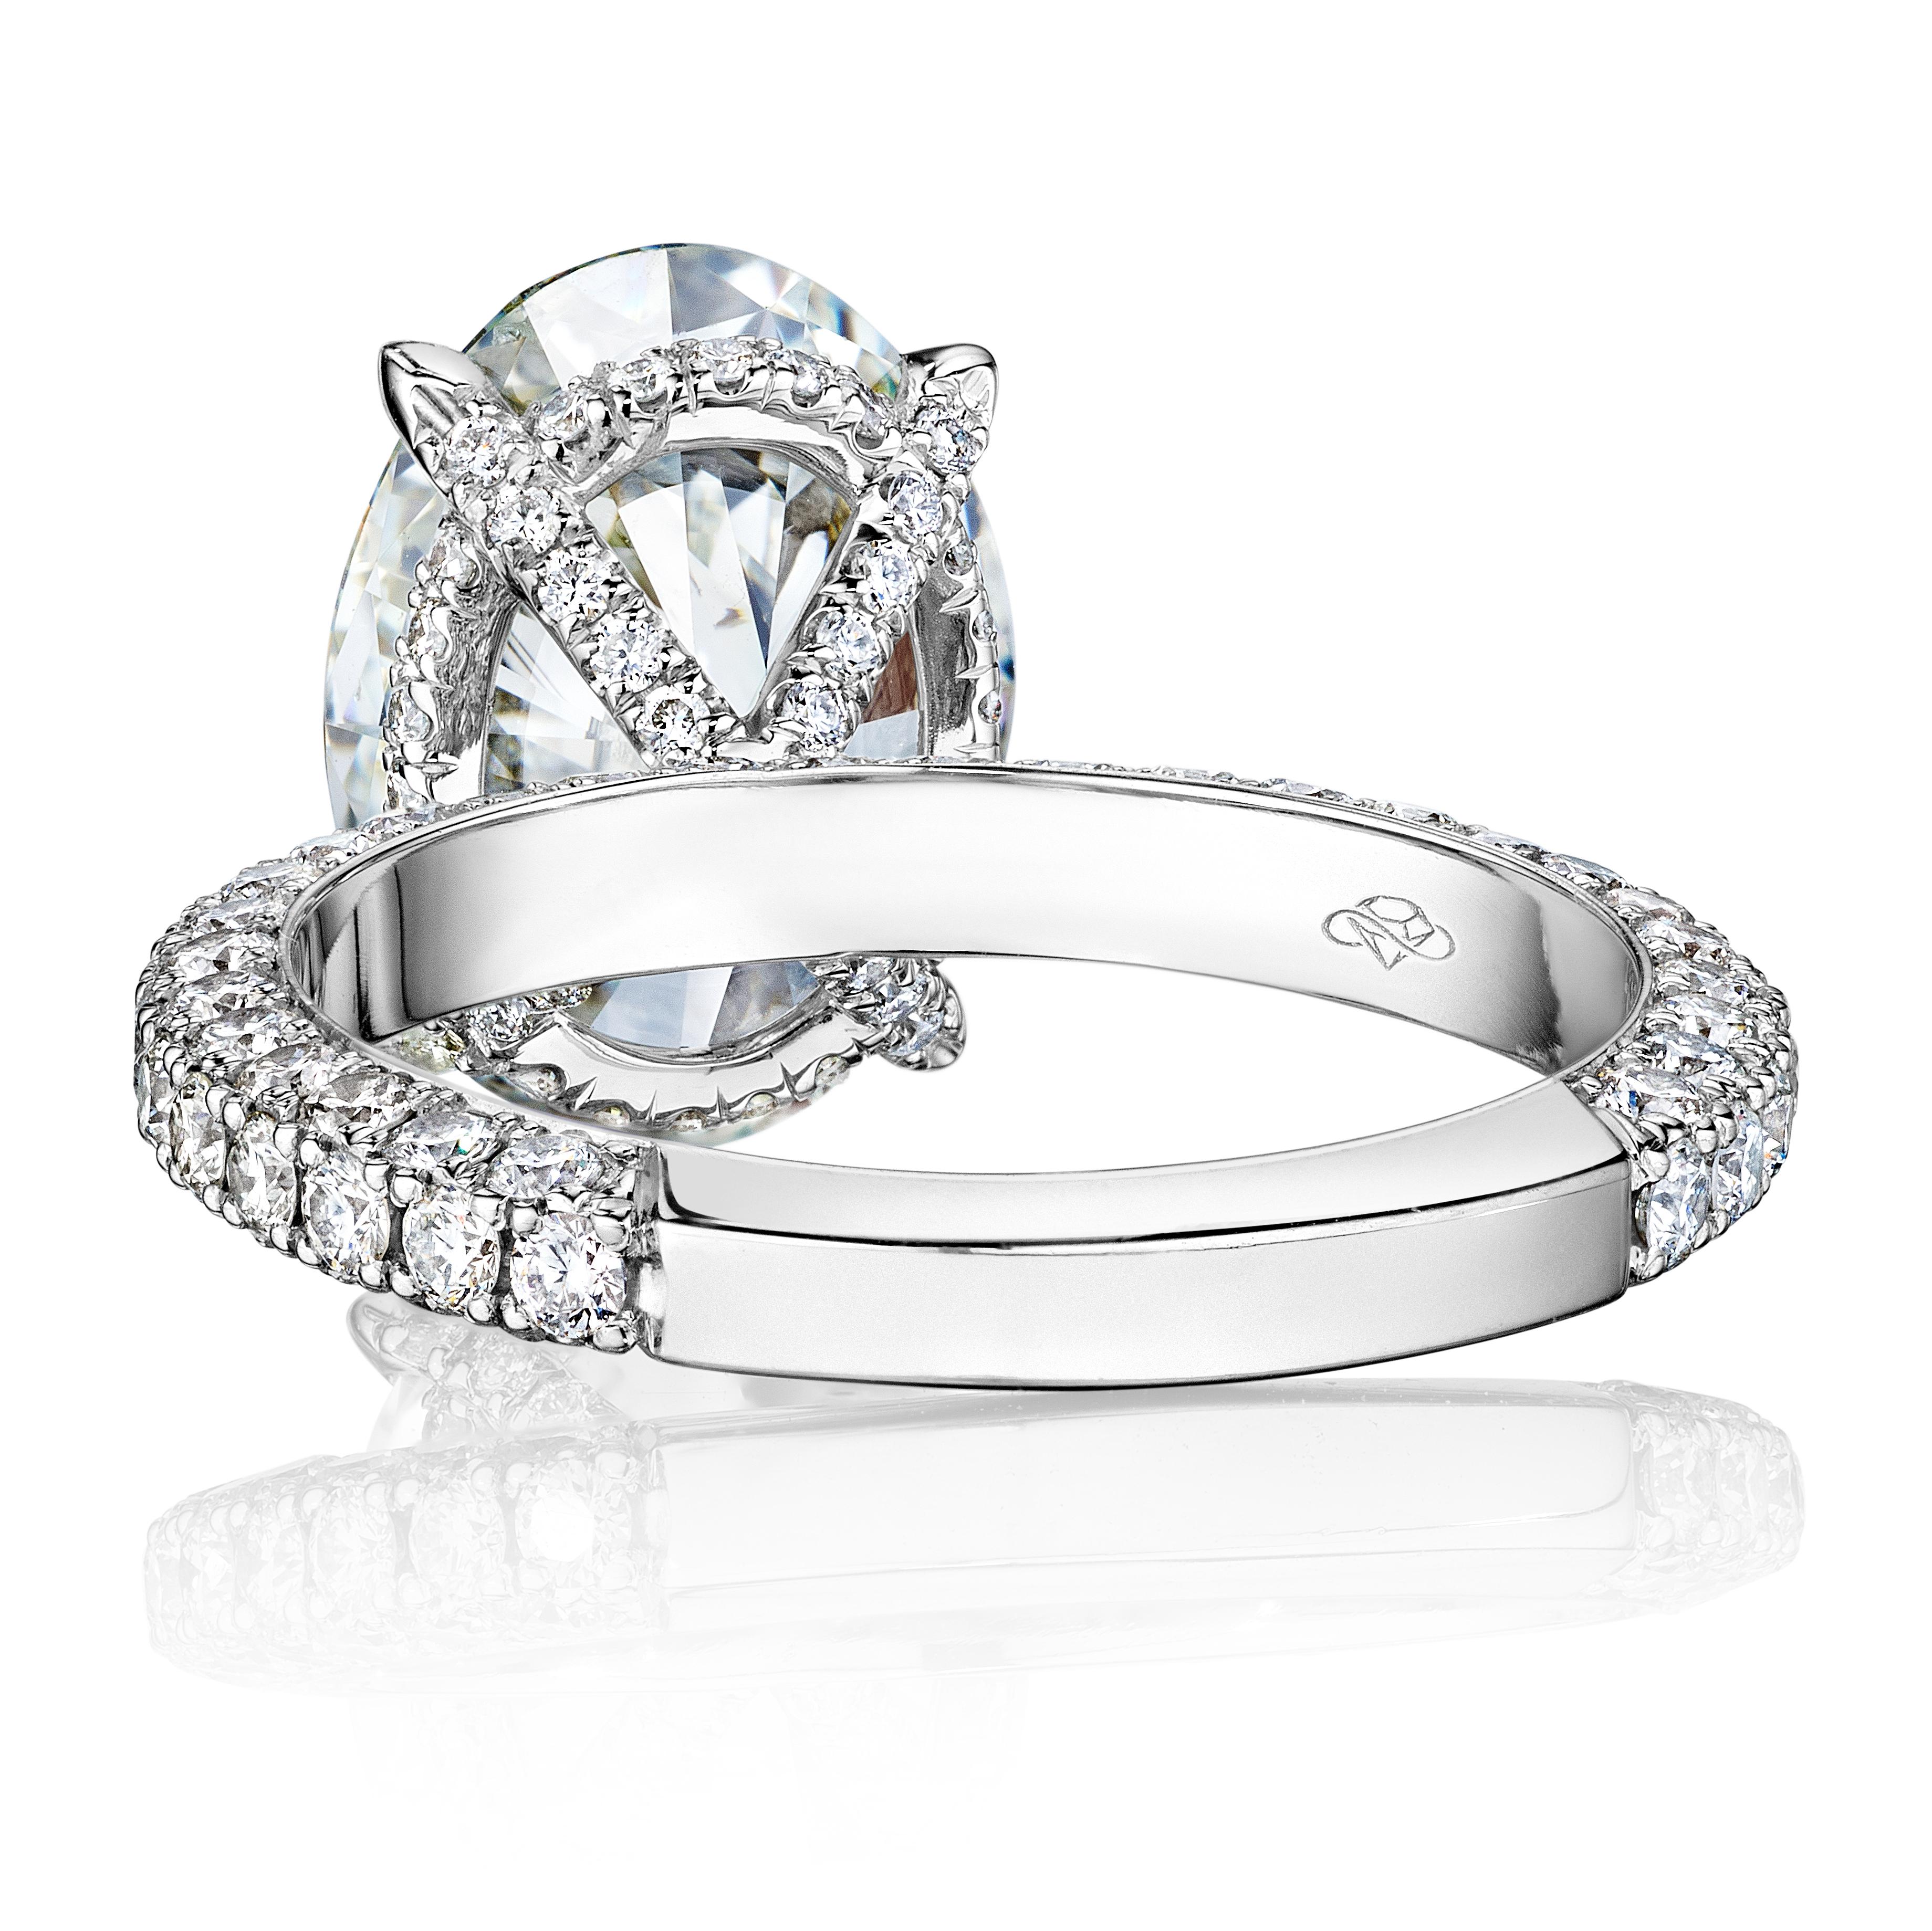 Discover unmatched elegance with this exquisite, custom-made platinum engagement ring, prominently featuring a breathtaking 4-carat oval diamond. The central gemstone, meticulously selected for its superior cut, clarity, and color, boasts a symphony